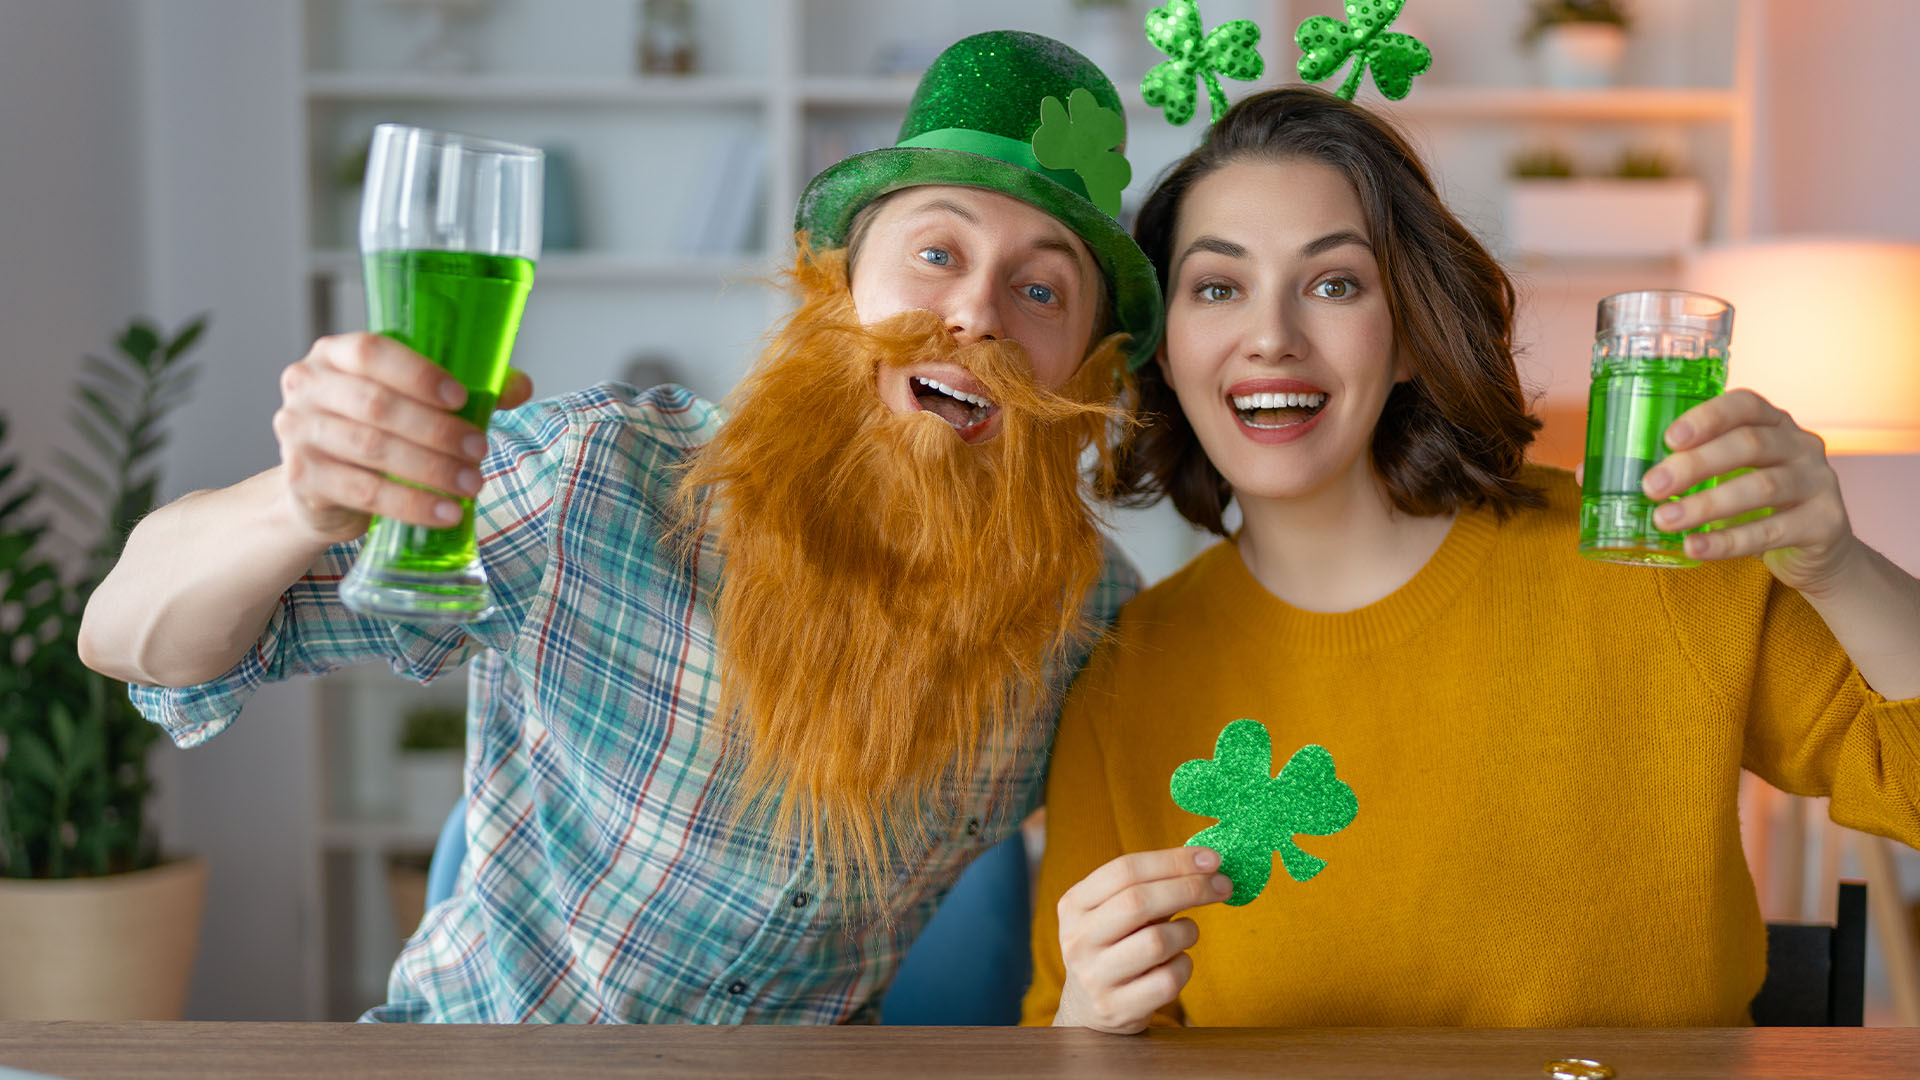 Too Many Car Accidents That Happen On St. Patrick’s Day End Tragically 1 St. Patrick's Day Accidents South Florida Injury Law Firm